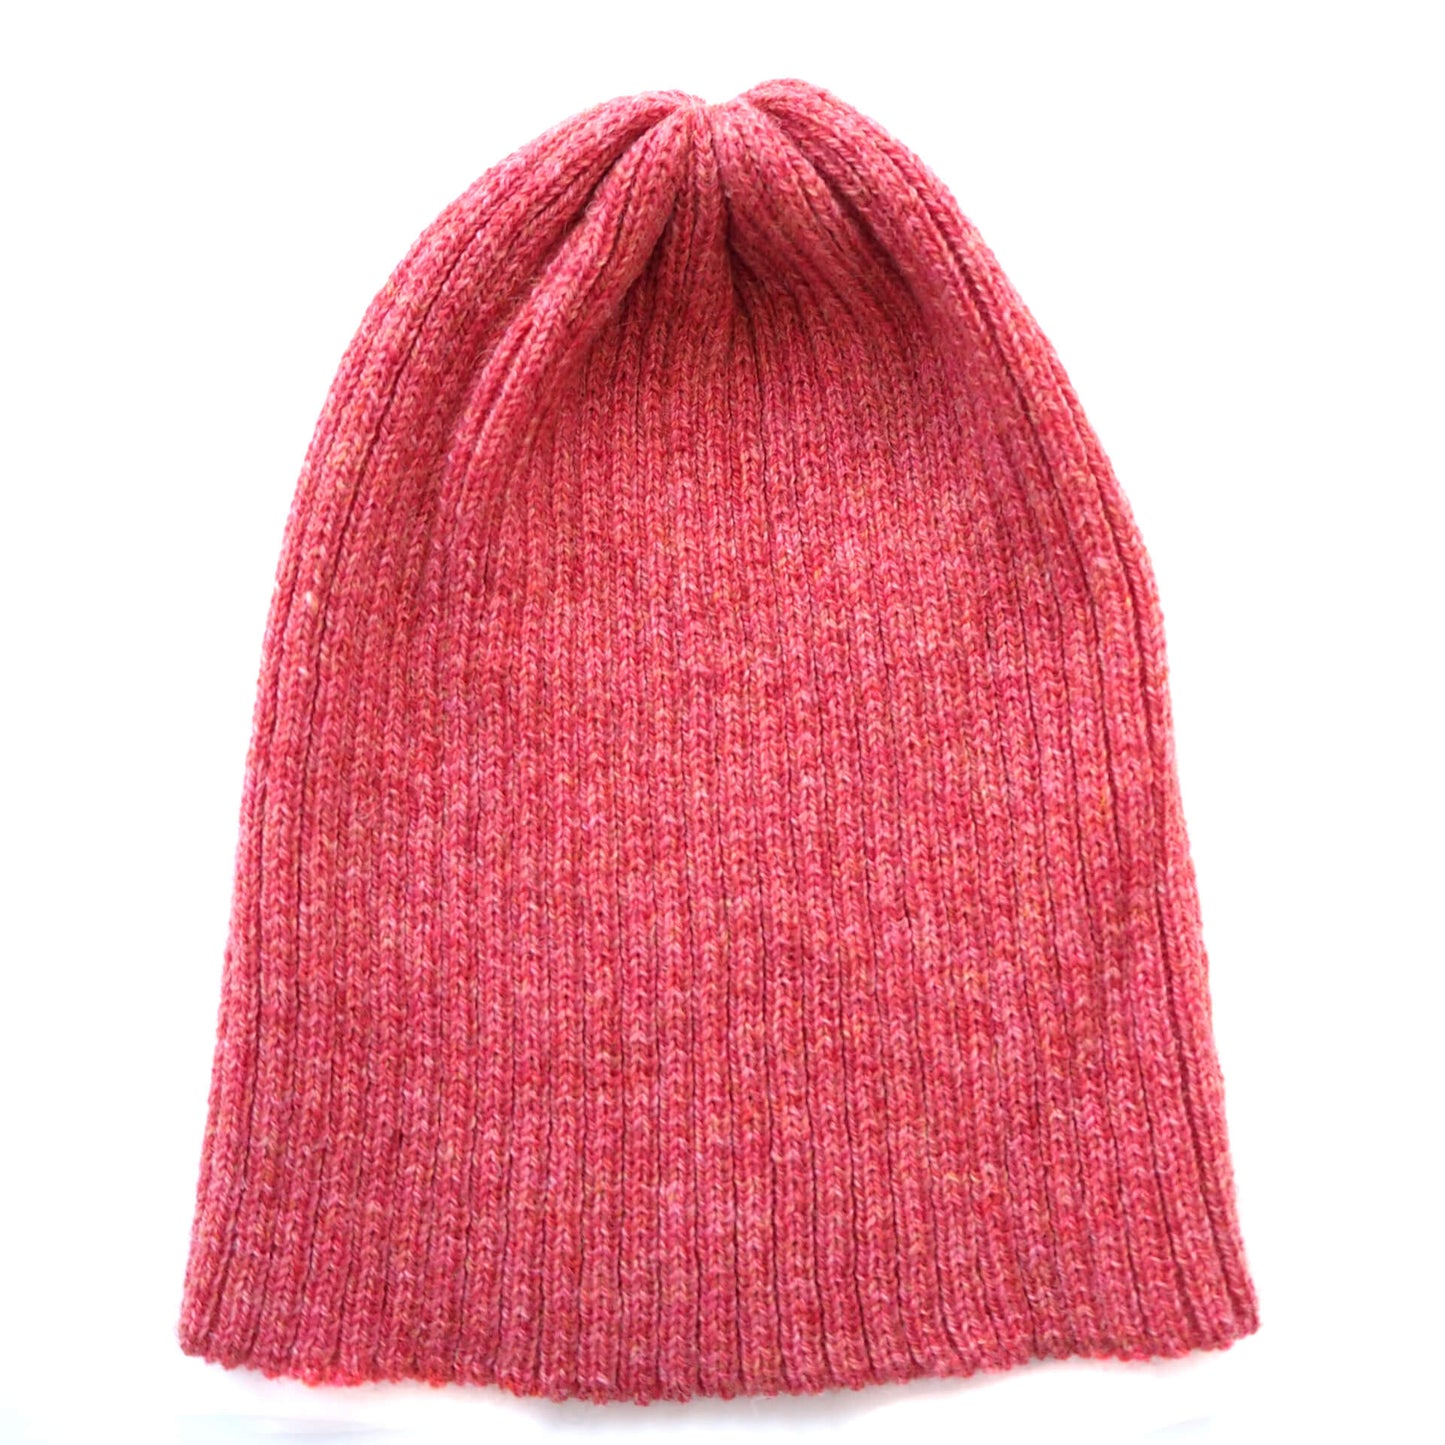 A pink ribbed beanie without a folded brim by K.Moods. It is on a white background.